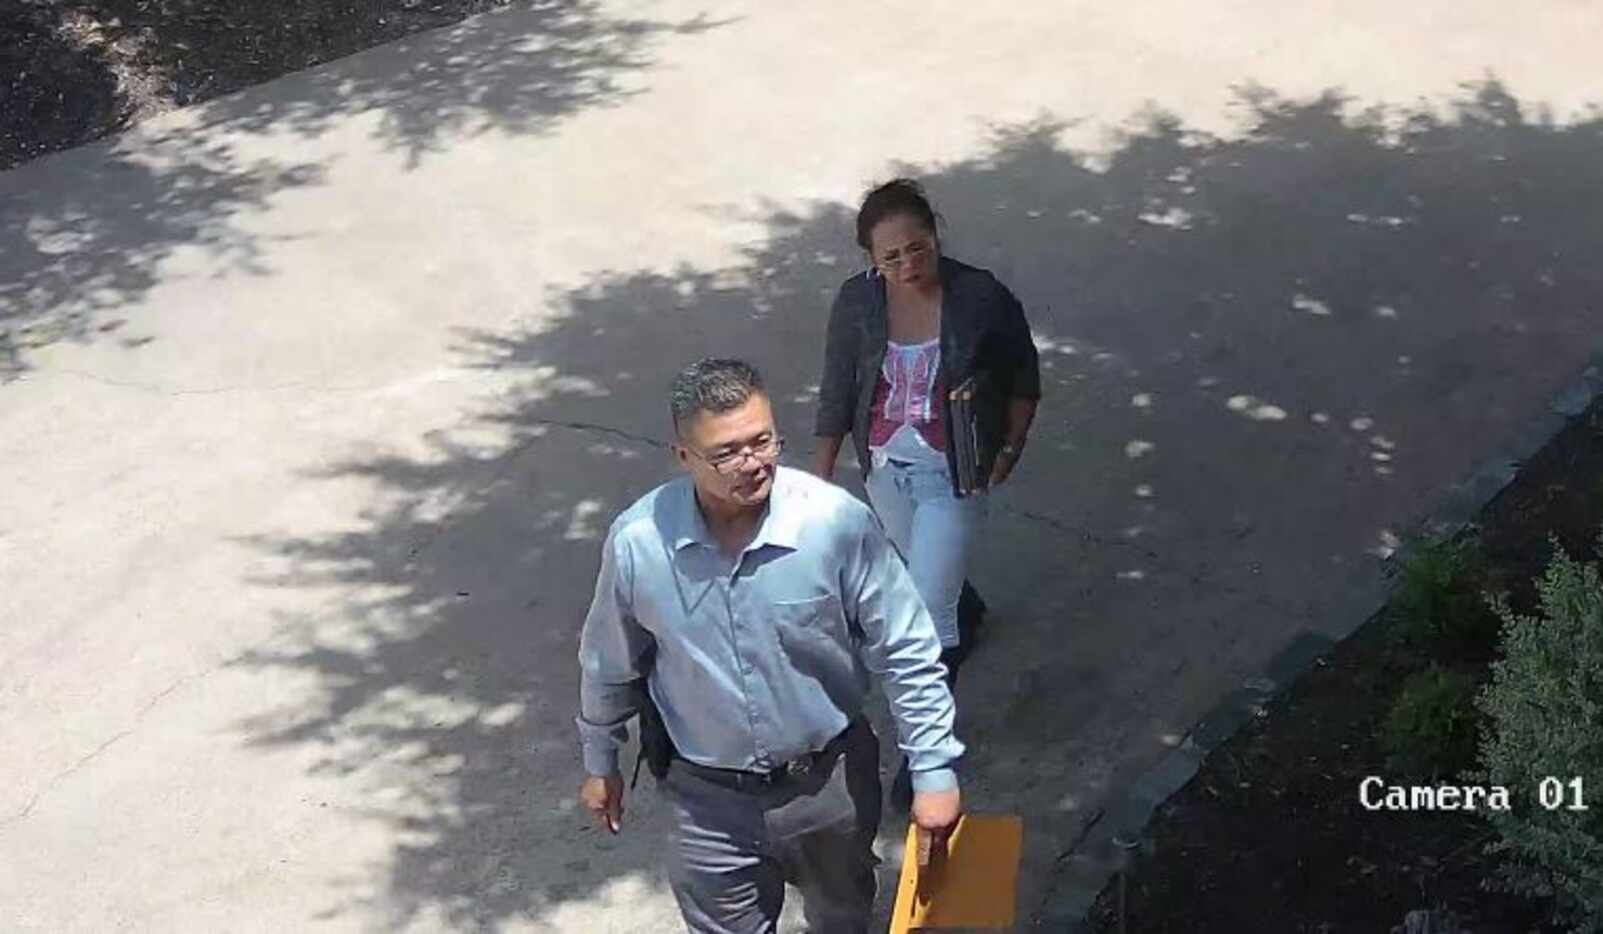 Police are hoping someone can identify the man and woman.